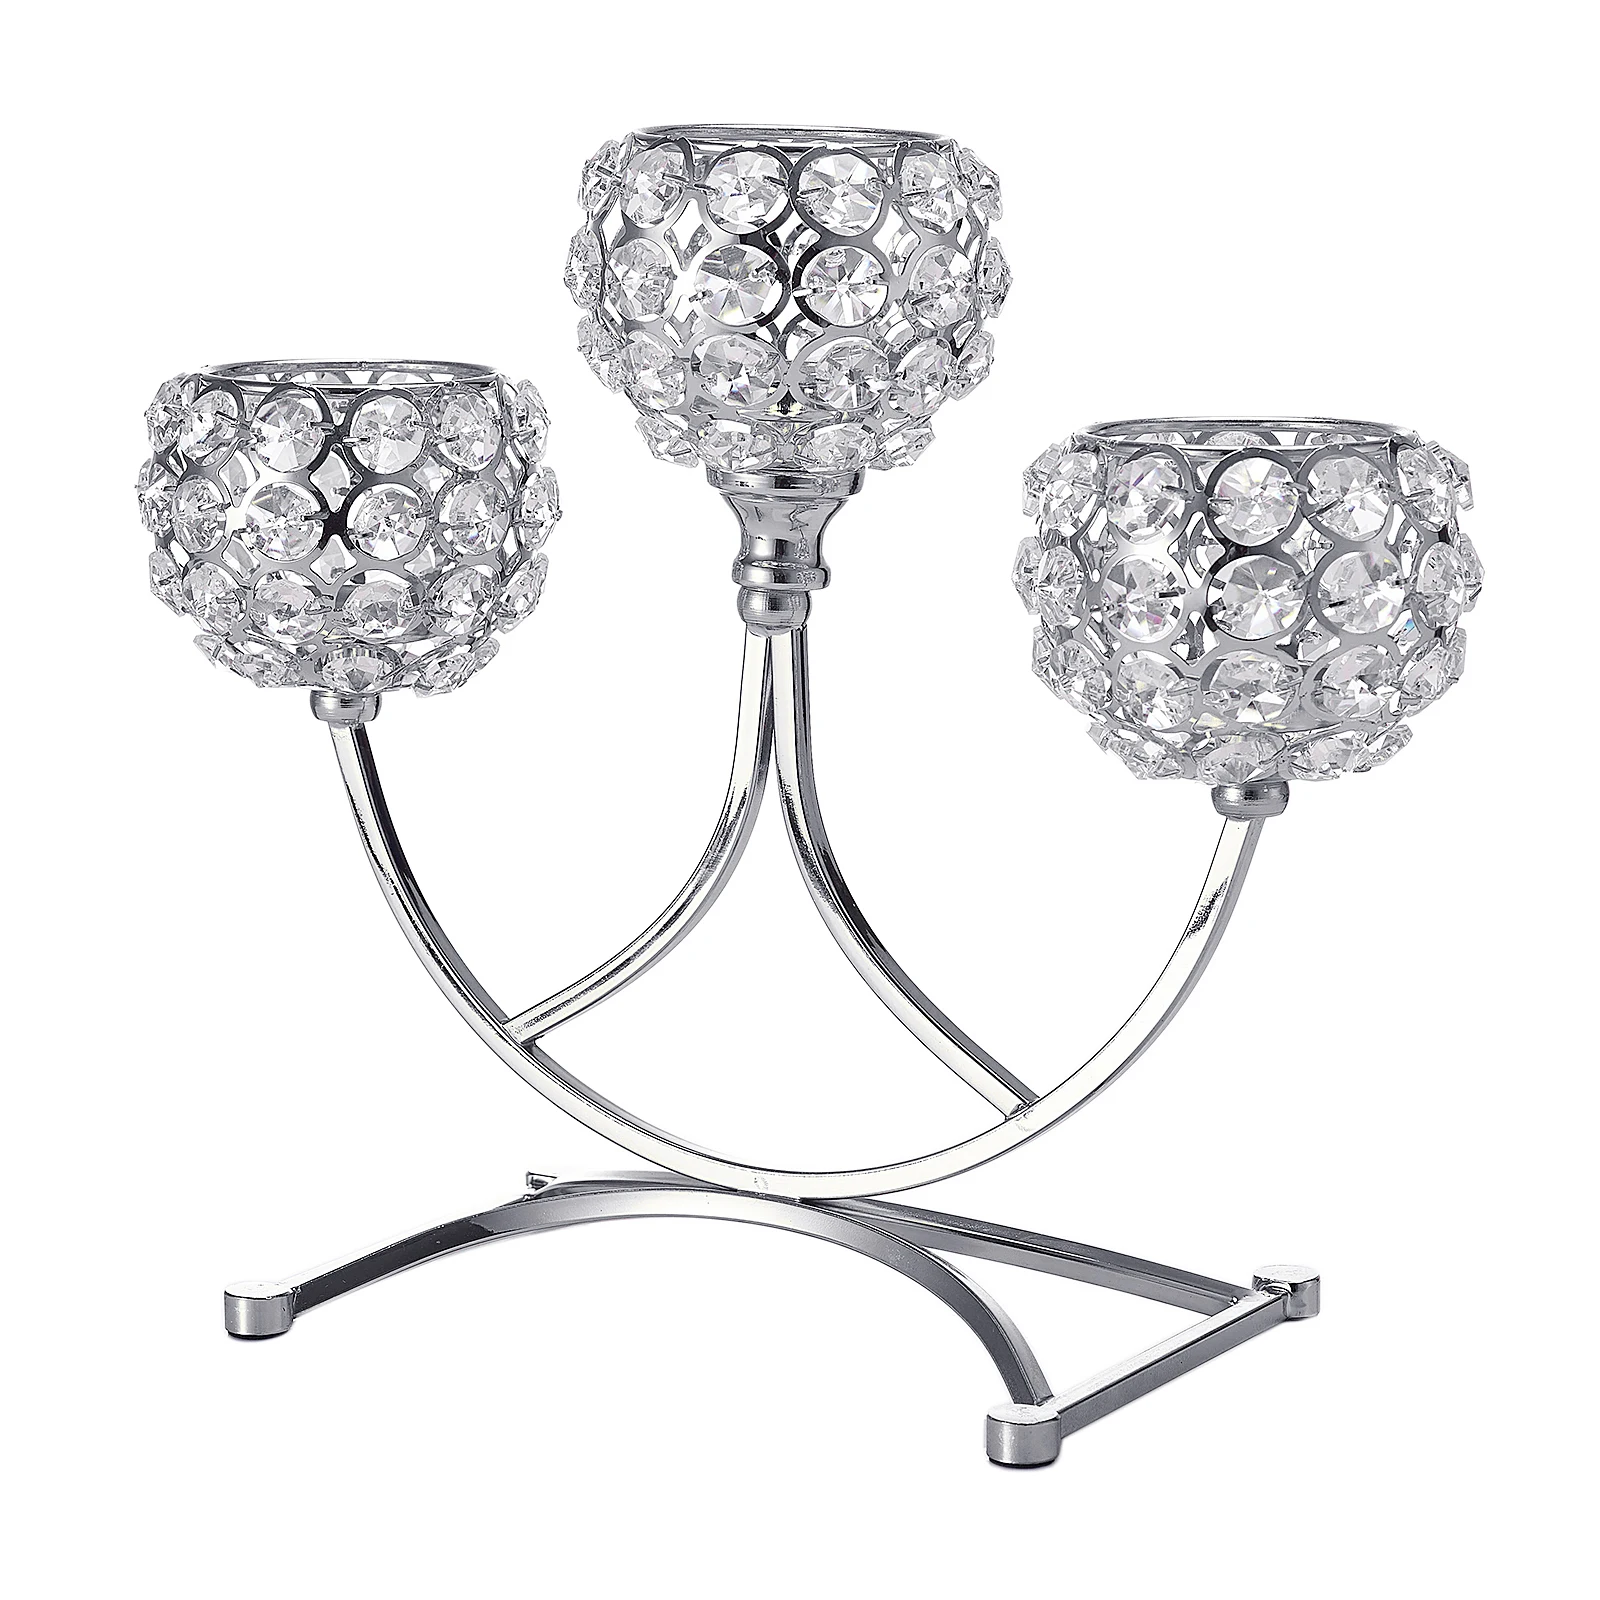 3-Arm Silver Crystal Candle Holder Dining Table Candlestick Candelabra